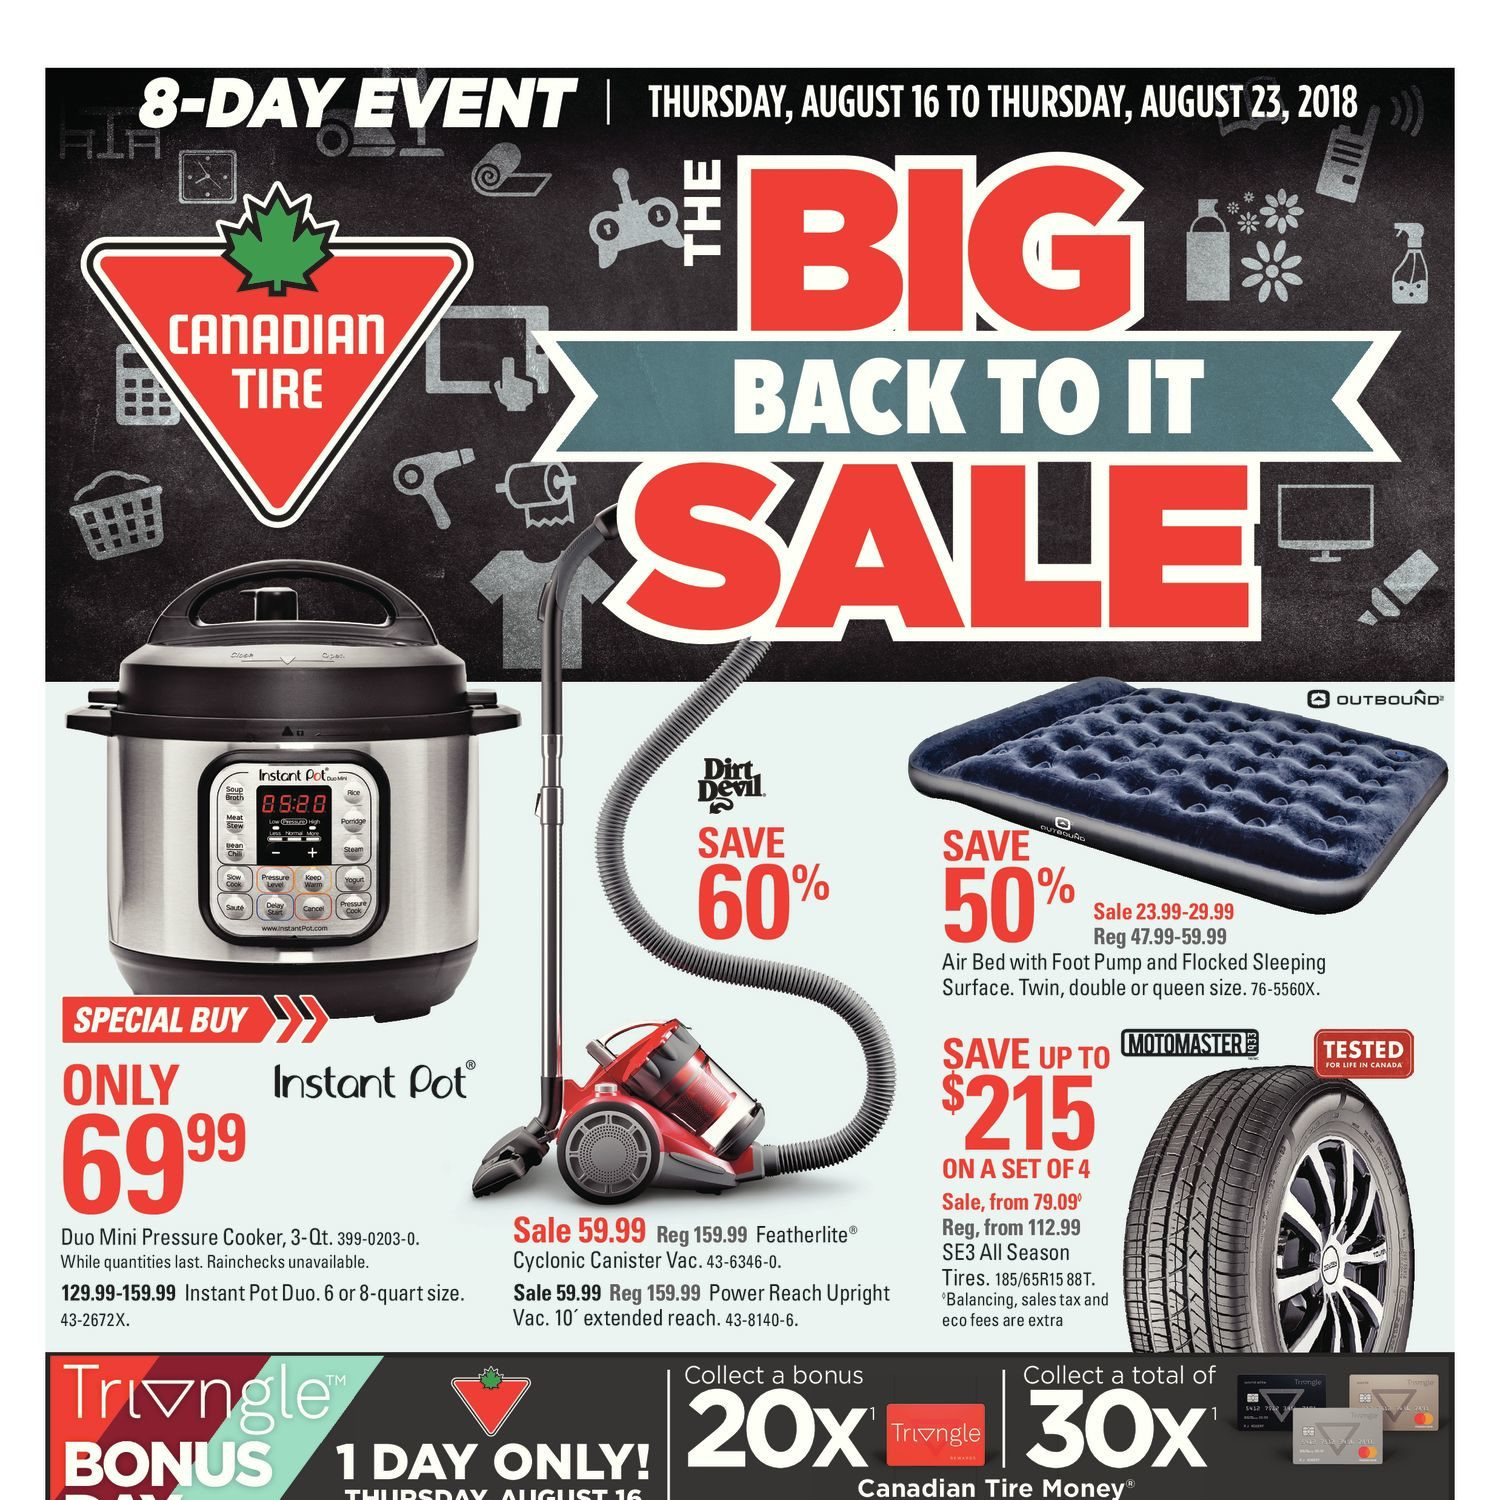 14 Lovable Hardwood Floor Nailer Canadian Tire 2024 free download hardwood floor nailer canadian tire of canadian tire weekly flyer 8 day event the big back to it sale with regard to canadian tire weekly flyer 8 day event the big back to it sale aug 16 23 